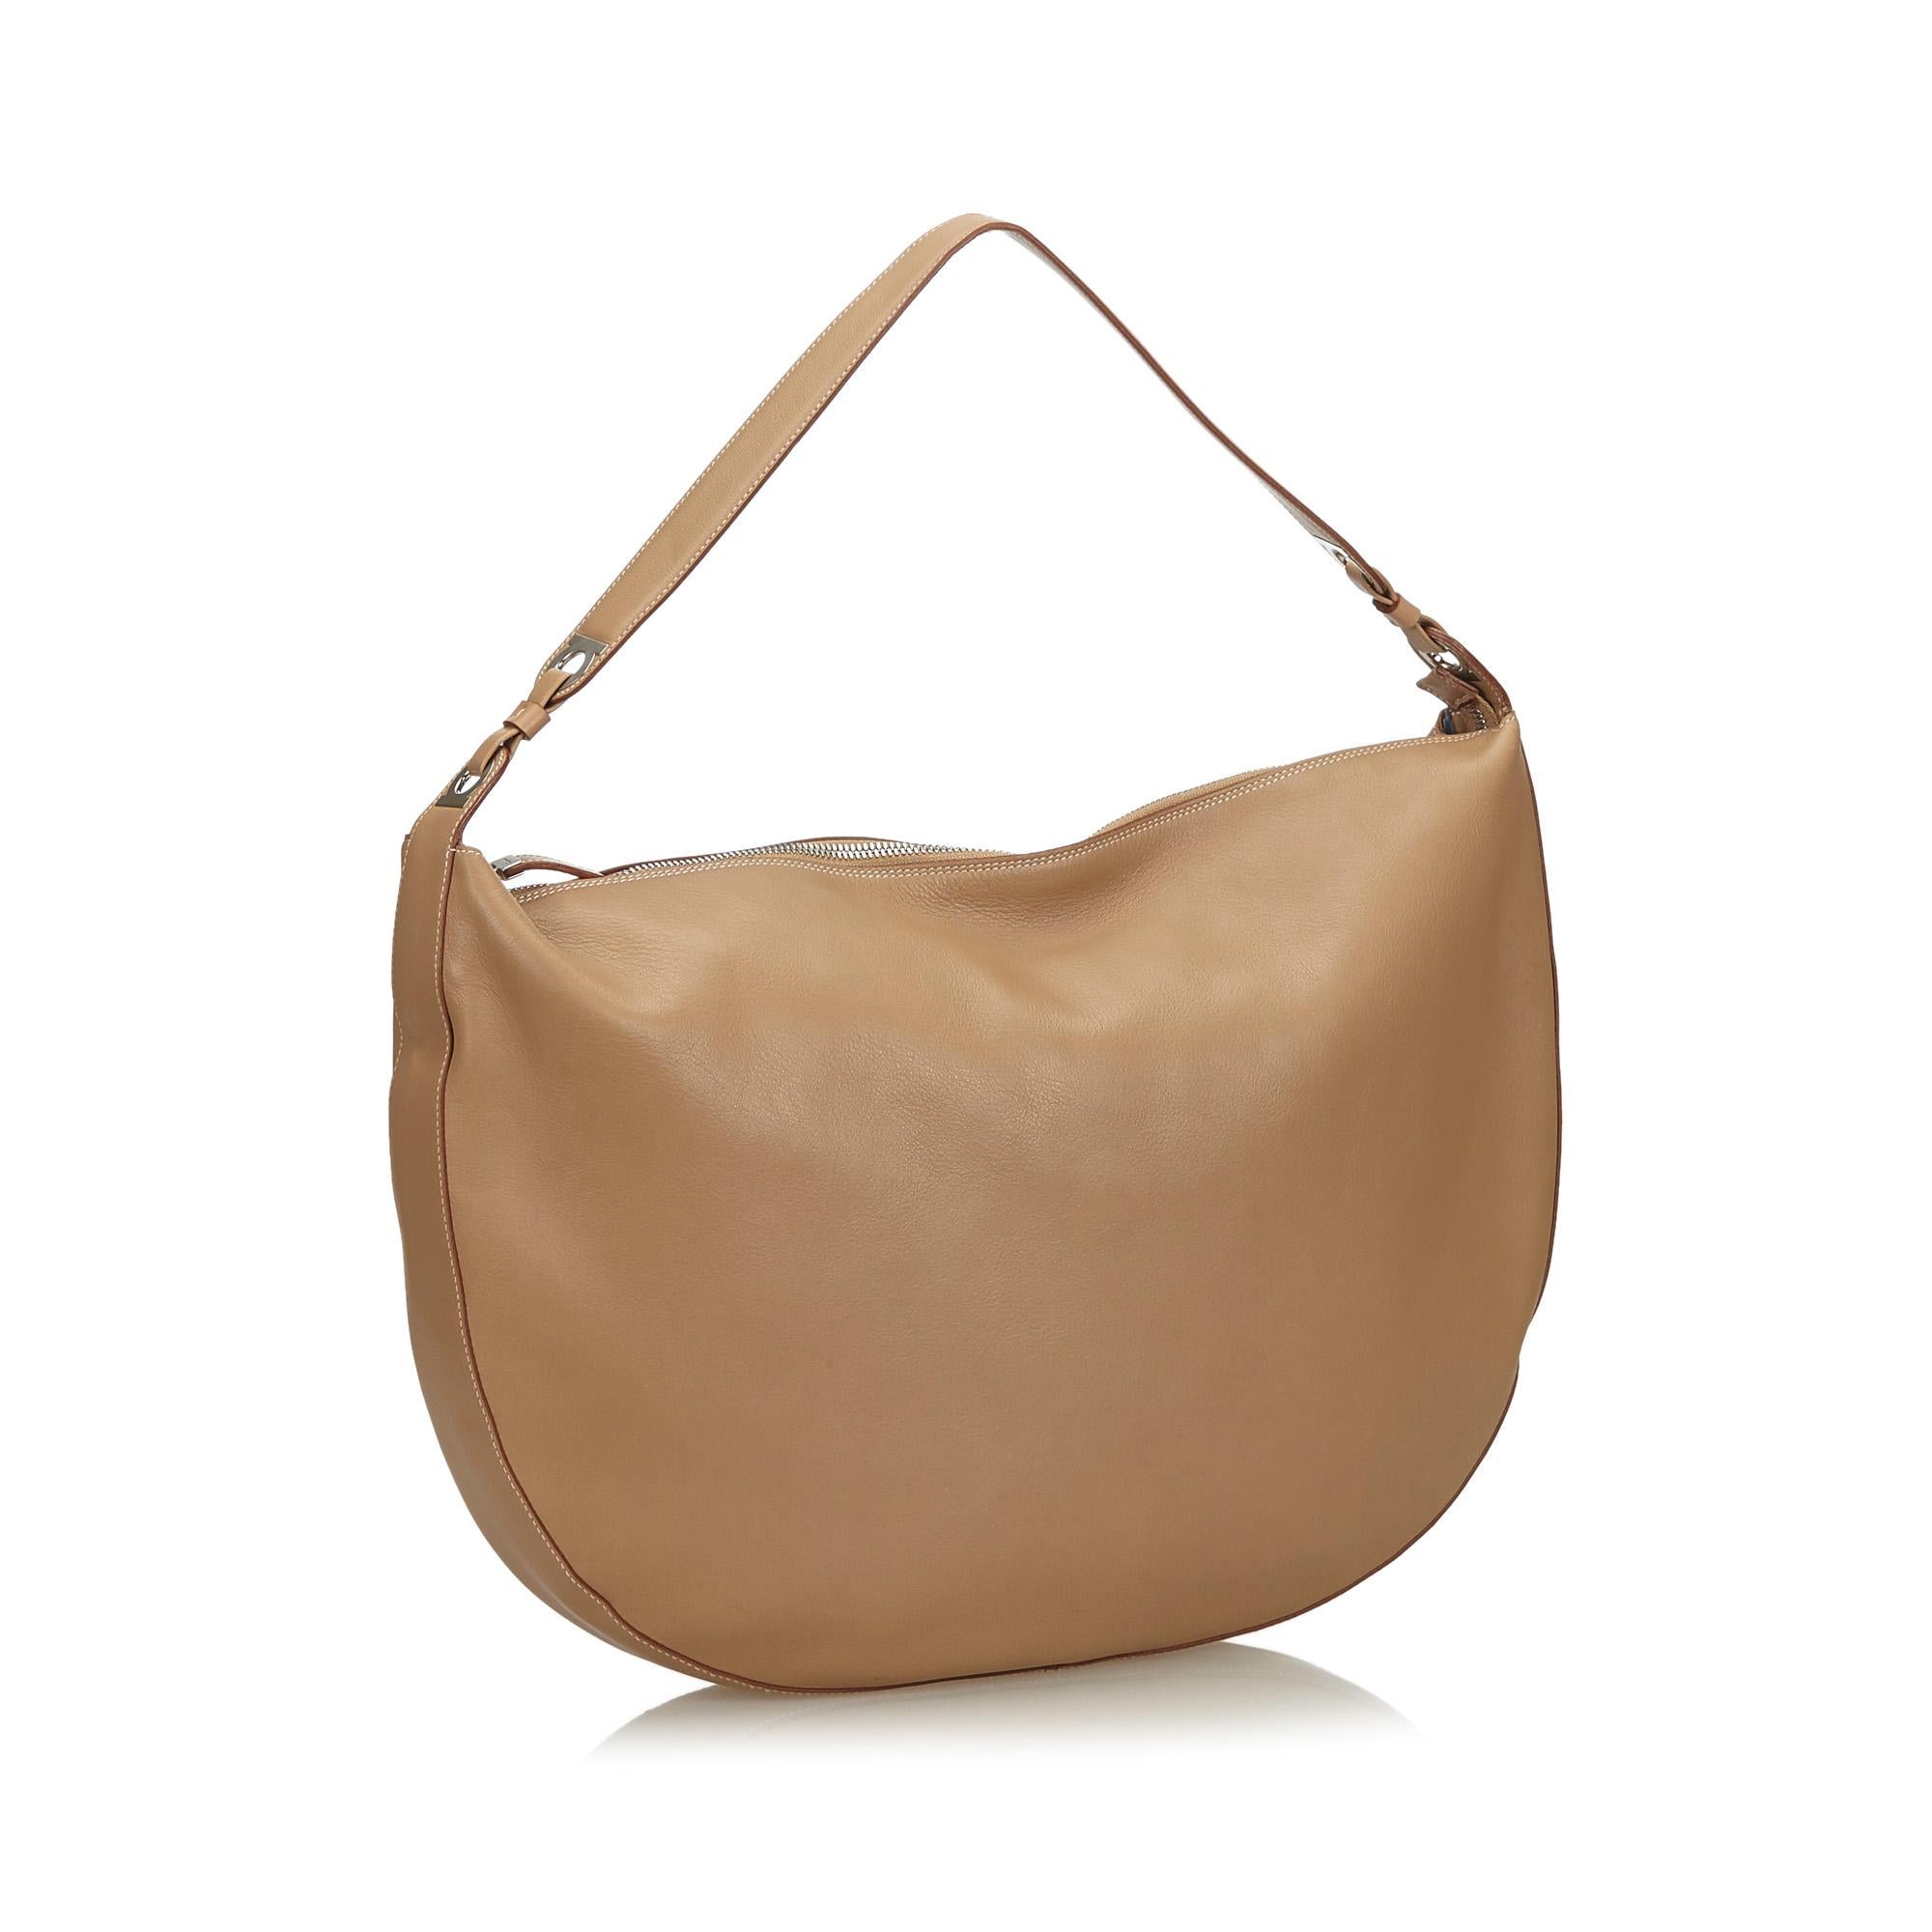 This shoulder bag features a leather body, a flat leather strap, a top zip closure, and an interior zip pocket. It carries as B condition rating.

Inclusions: 
Dust Bag

Dimensions:
Length: 33.00 cm
Width: 40.00 cm
Depth: 5.00 cm
Shoulder Drop: